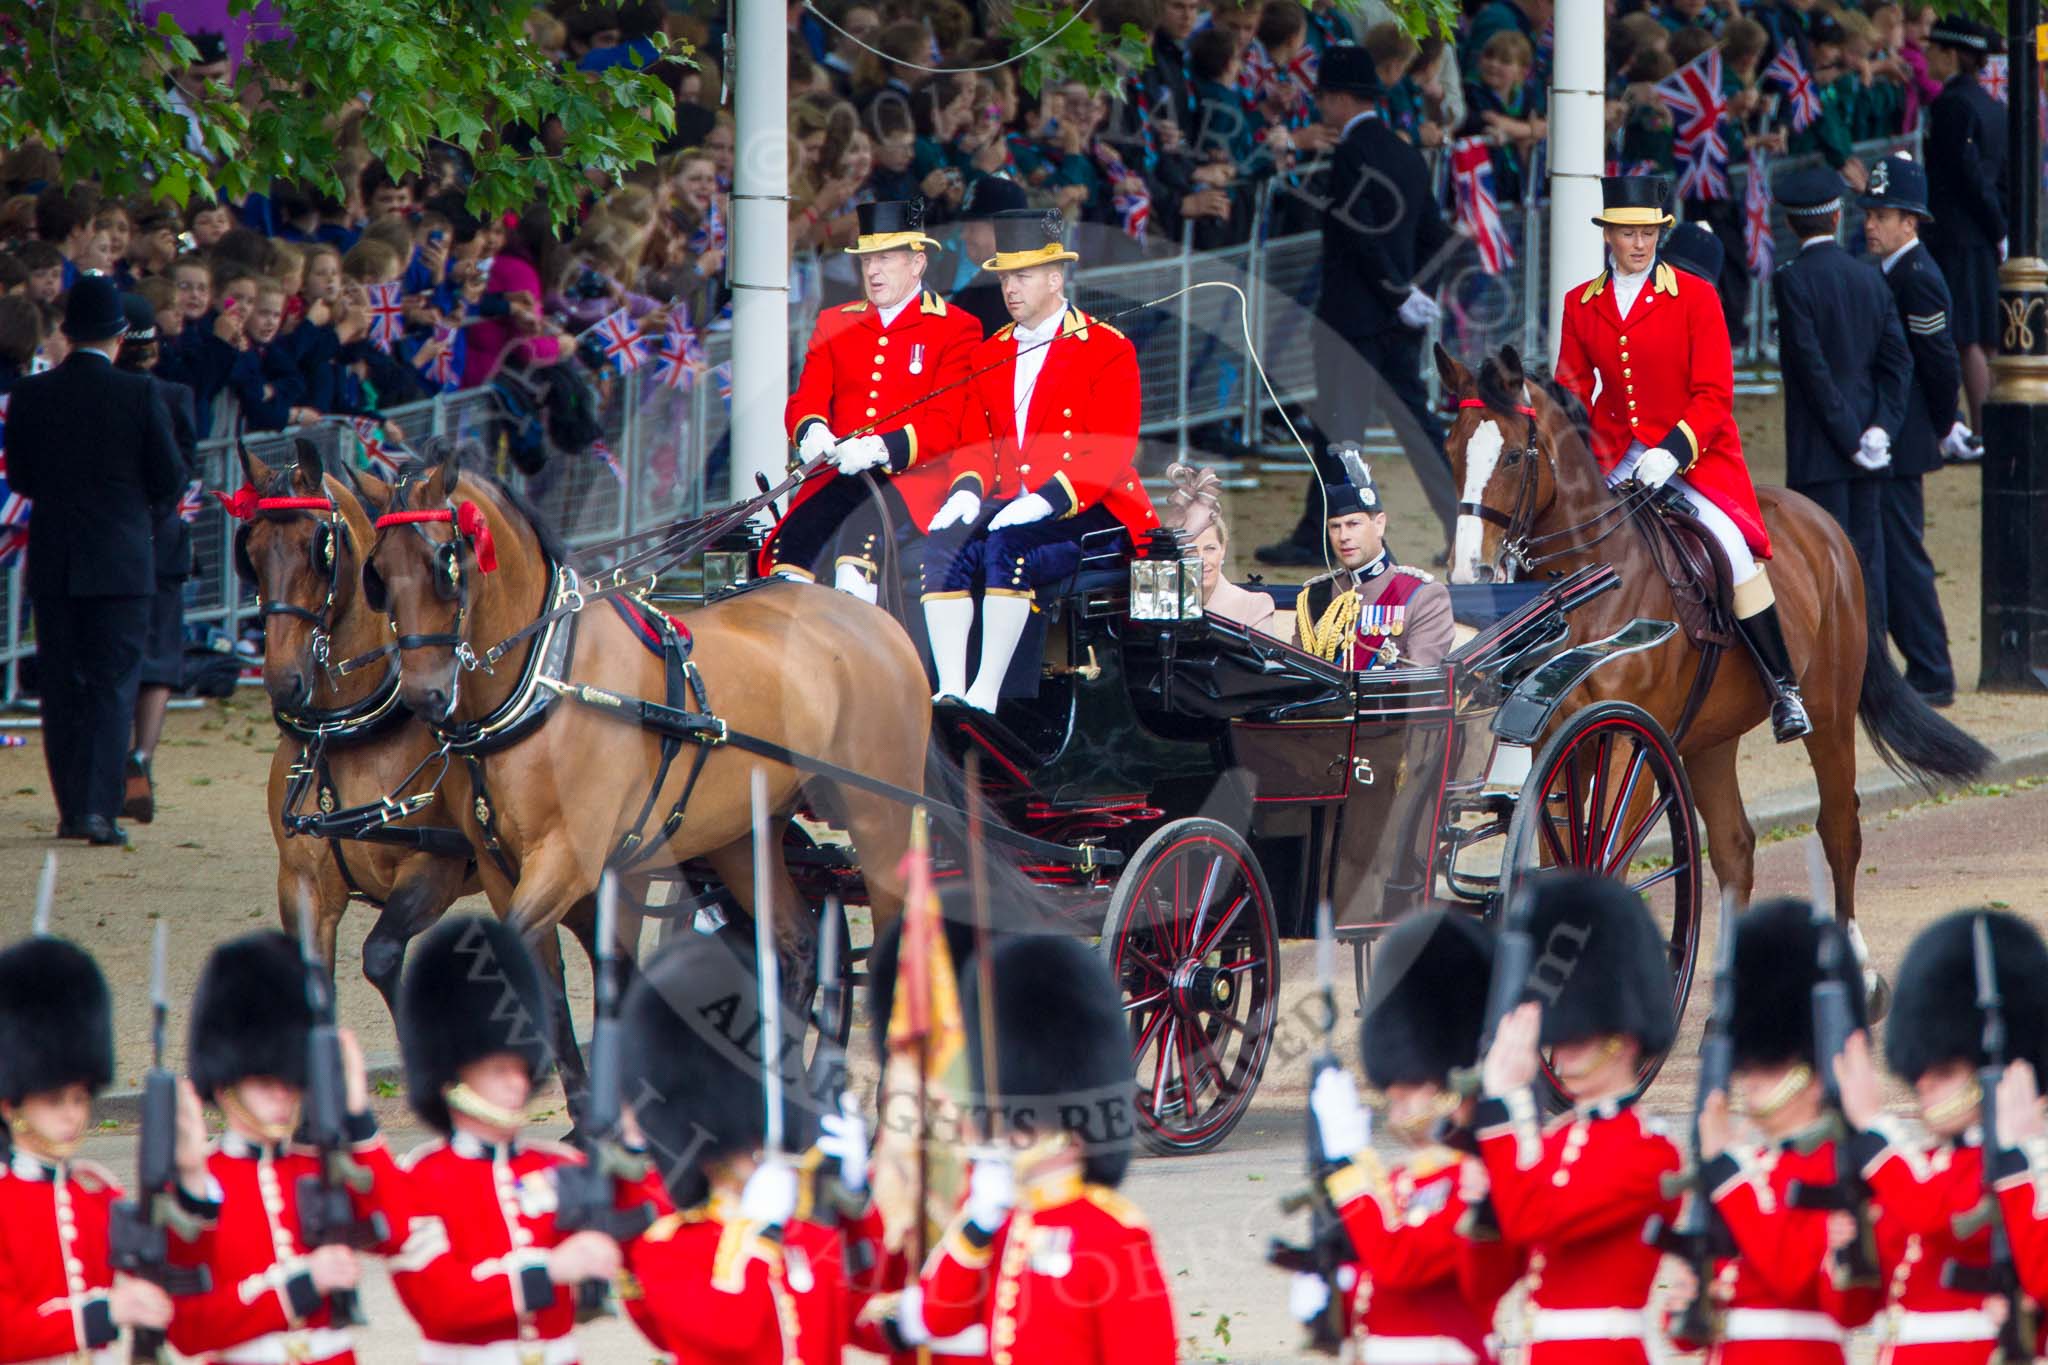 Trooping the Colour 2013: HRH The Earl of Wessex and HRH The Countess of Wessexin the third barouche carriage on the way across Horse Guards Parade to watch the parade from the Major General's office. Image #186, 15 June 2013 10:49 Horse Guards Parade, London, UK